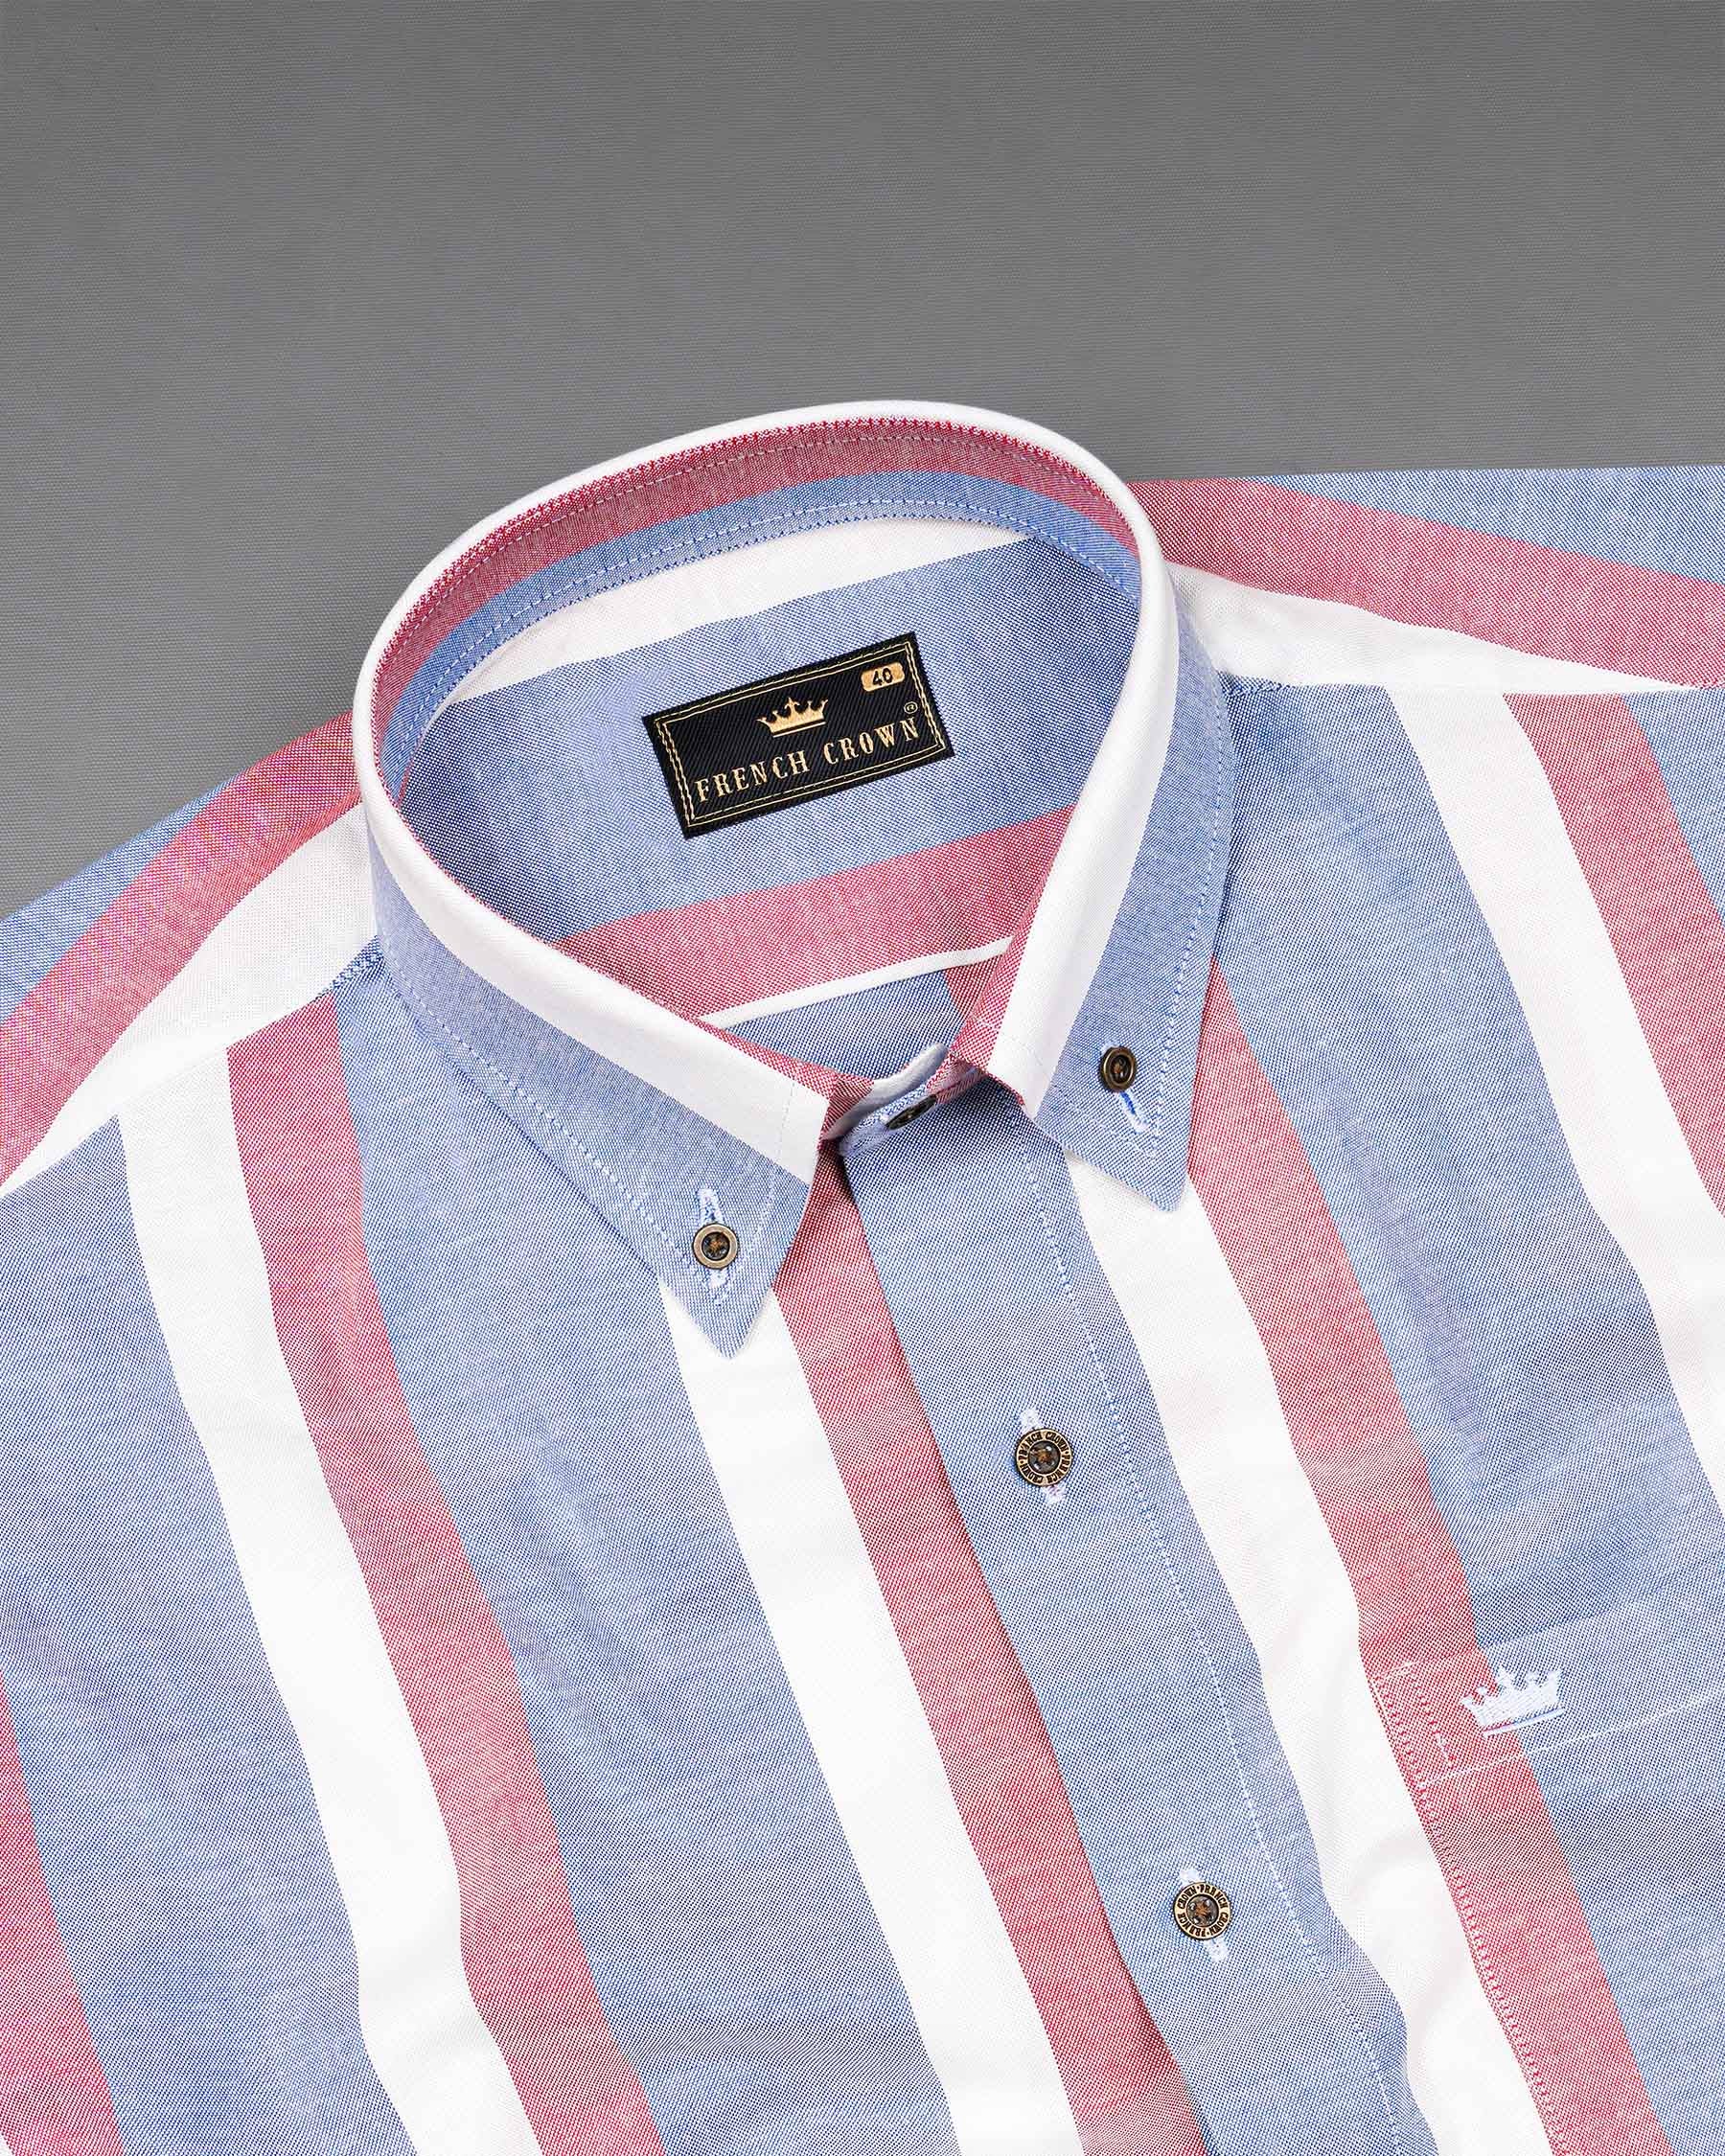 Wistful Blue and Charm Pink Striped Royal Oxford Shirt